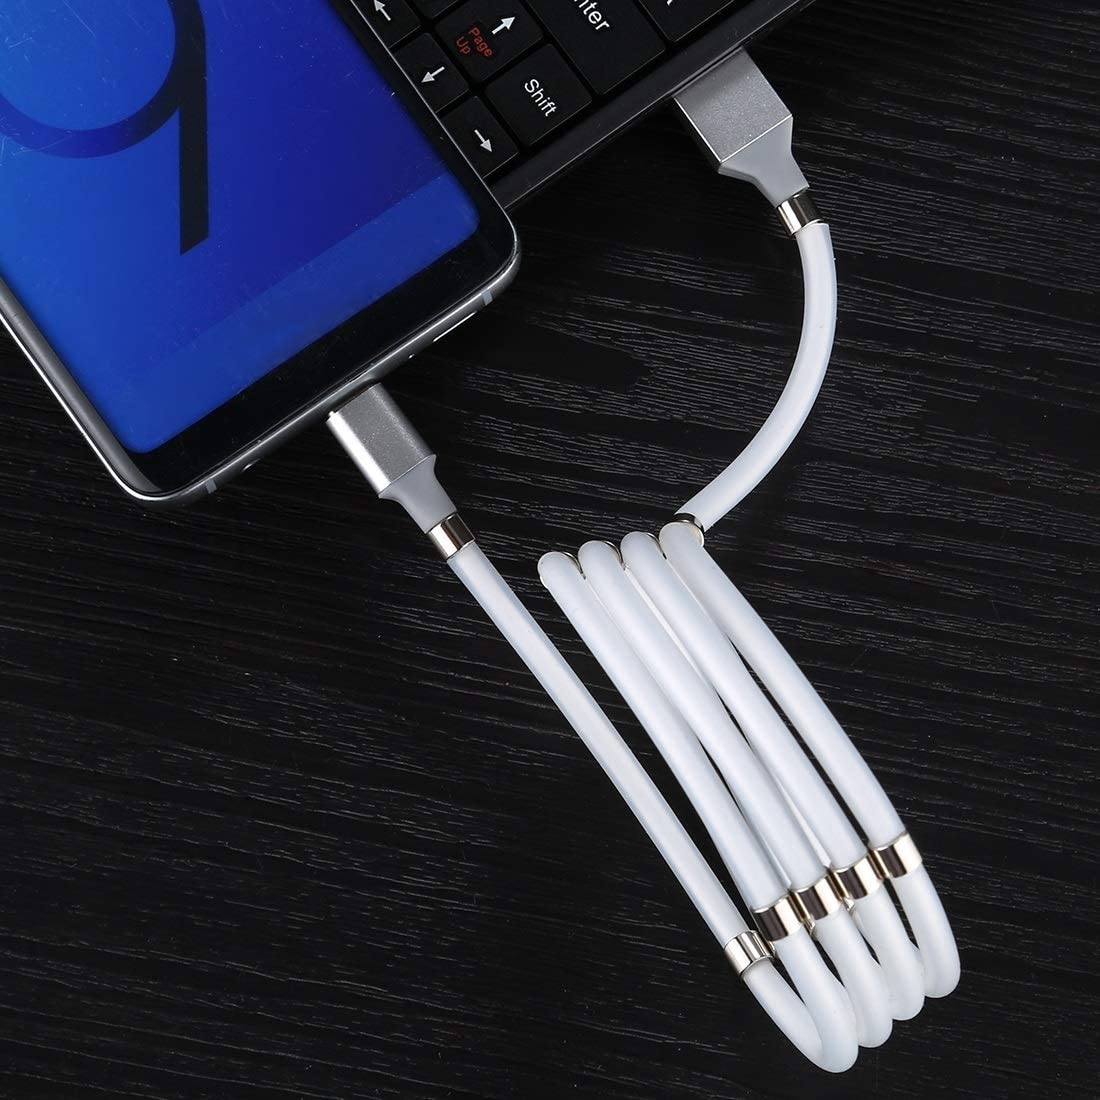 USB C Type C Magnetic Attraction CABLE%201399%20(24)%20(Copy)